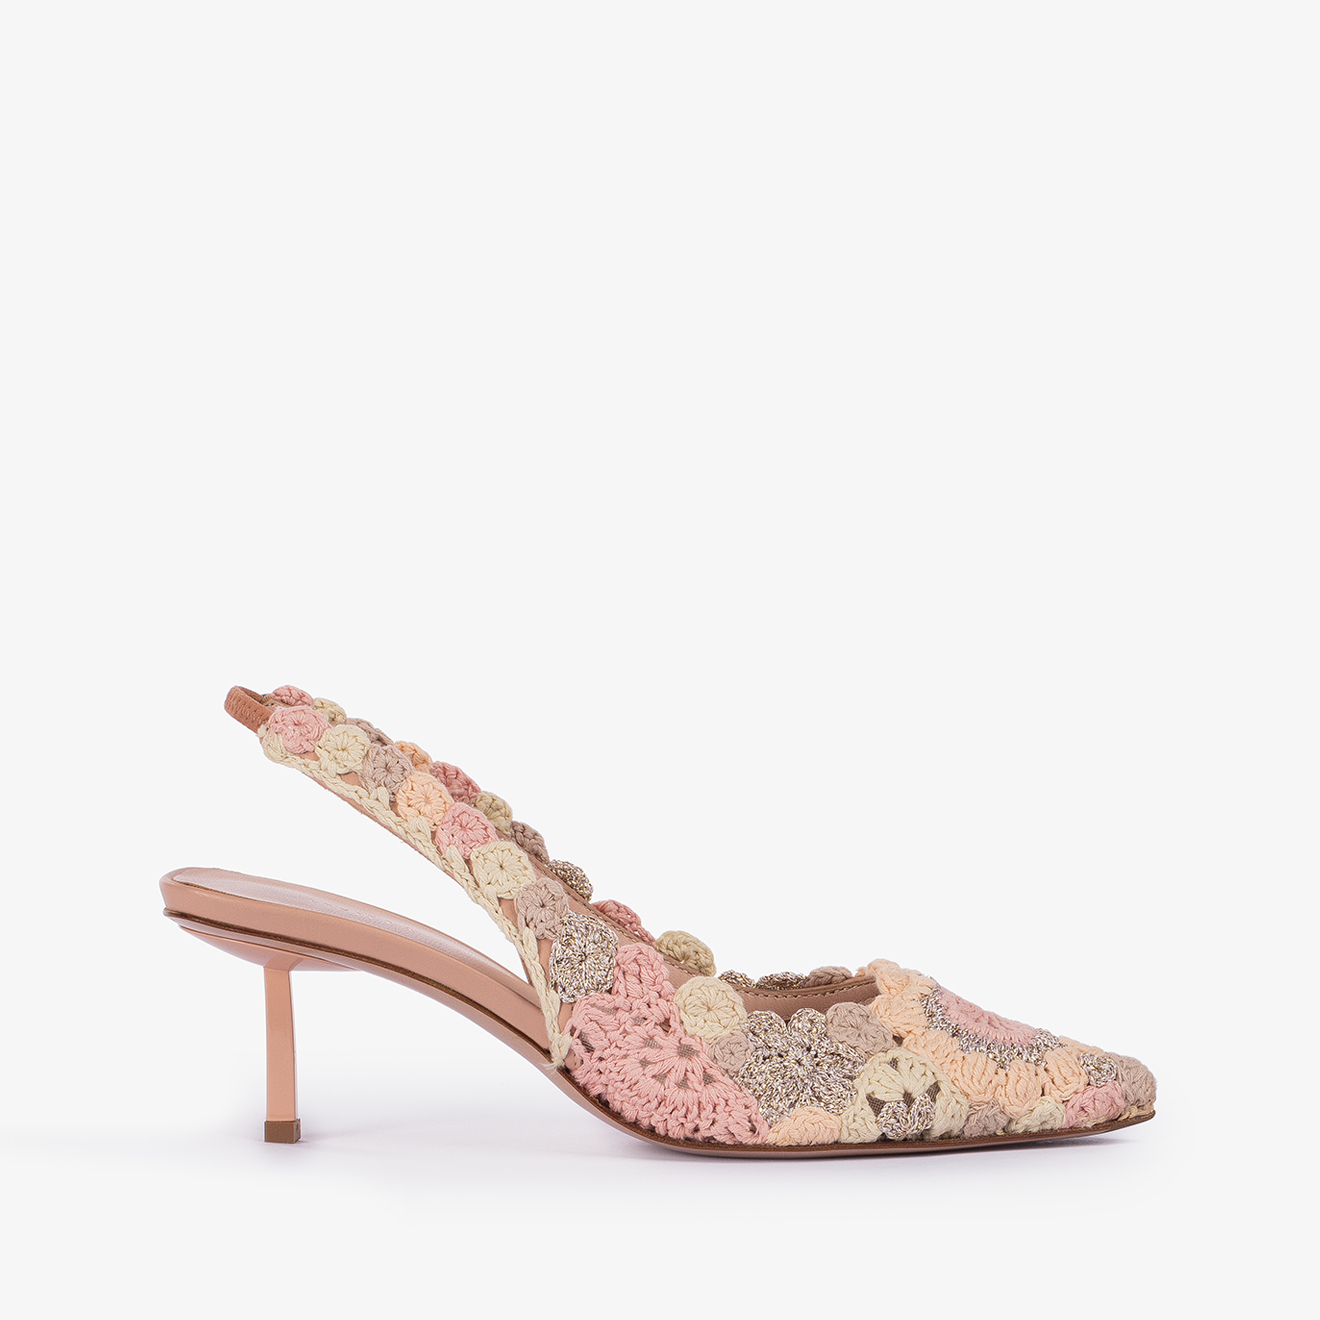 MURIEL SLINGBACK 60 mm - Le Silla official outlet